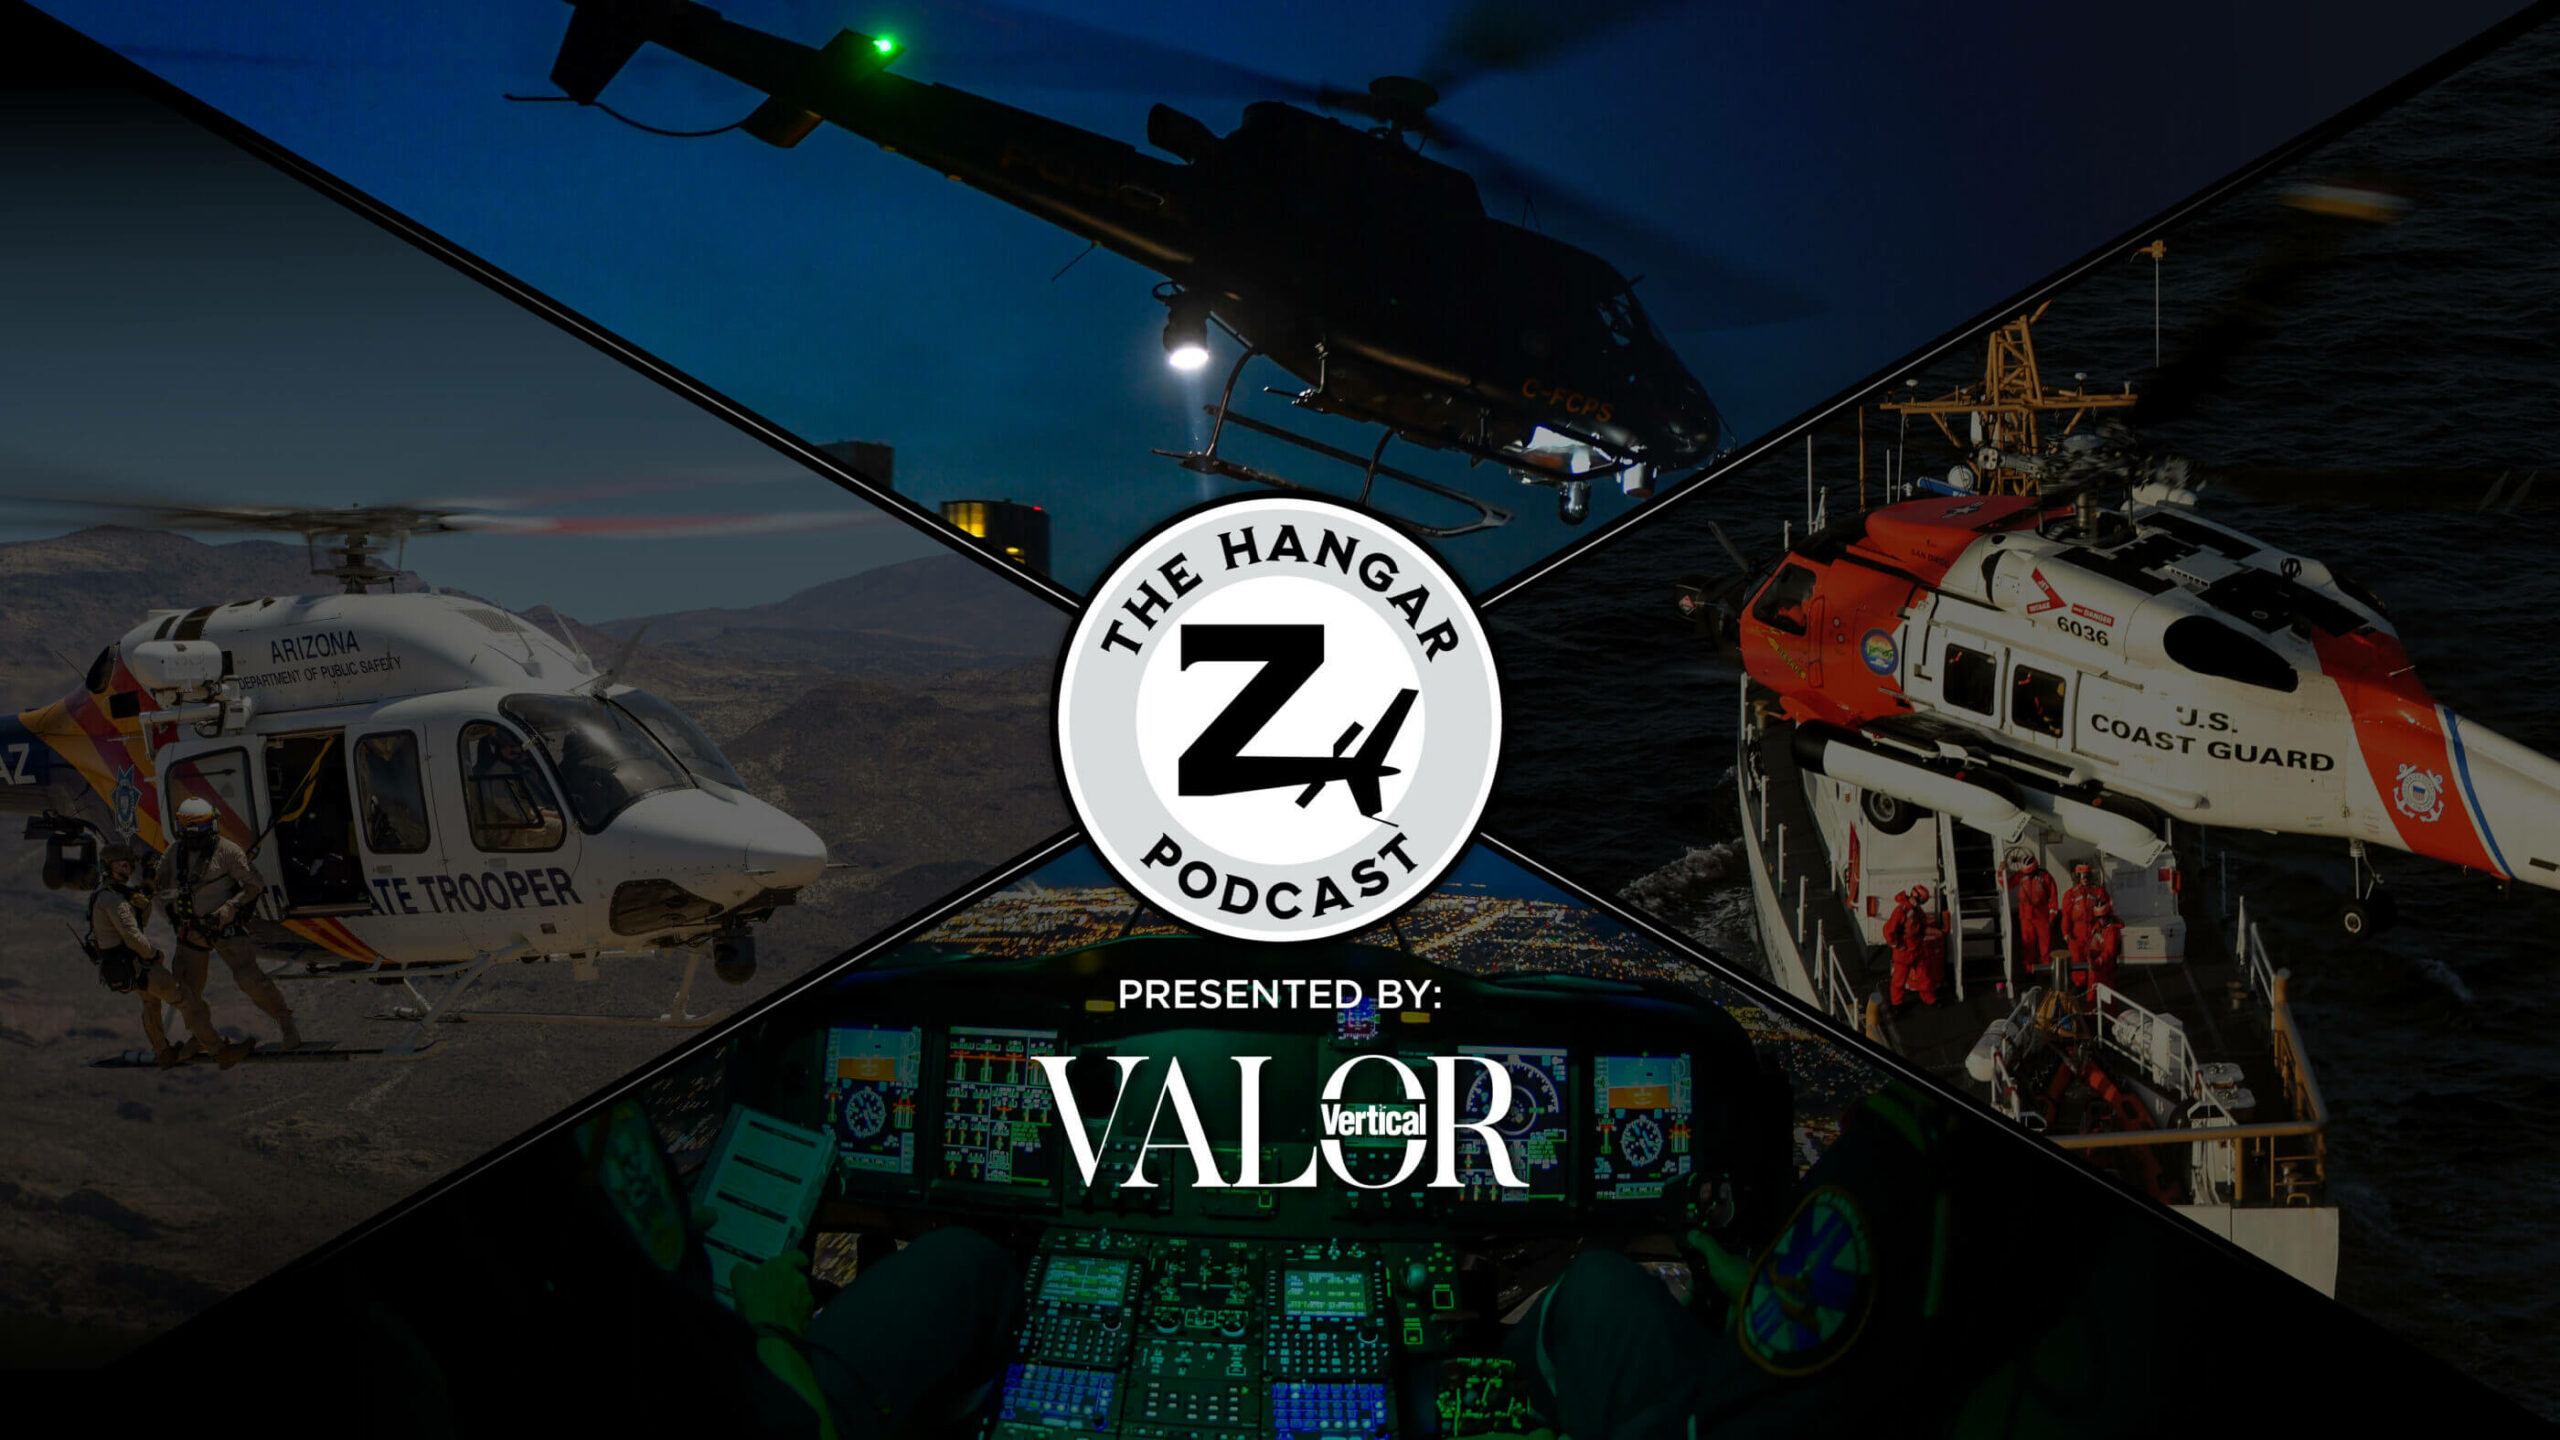 The Hangar Z Podcast: Forever on the Fly’s Diane Dollar on inspiring the next generation to pursue aviation